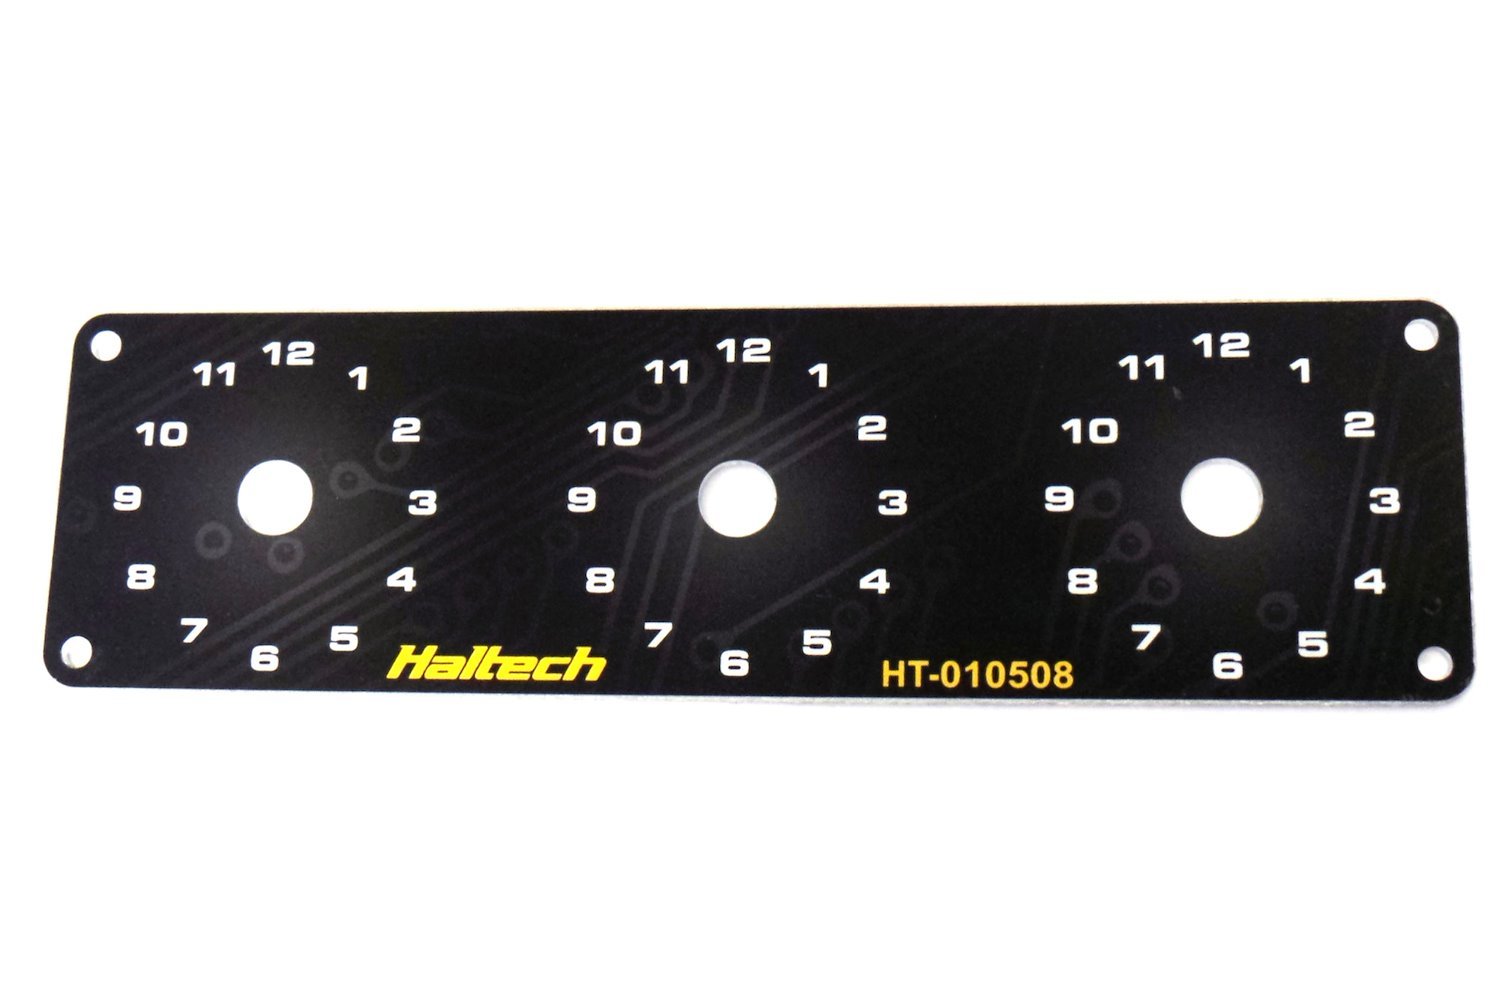 HT-010508 Triple Switch Panel Only, Includes Yellow & Red Knobs